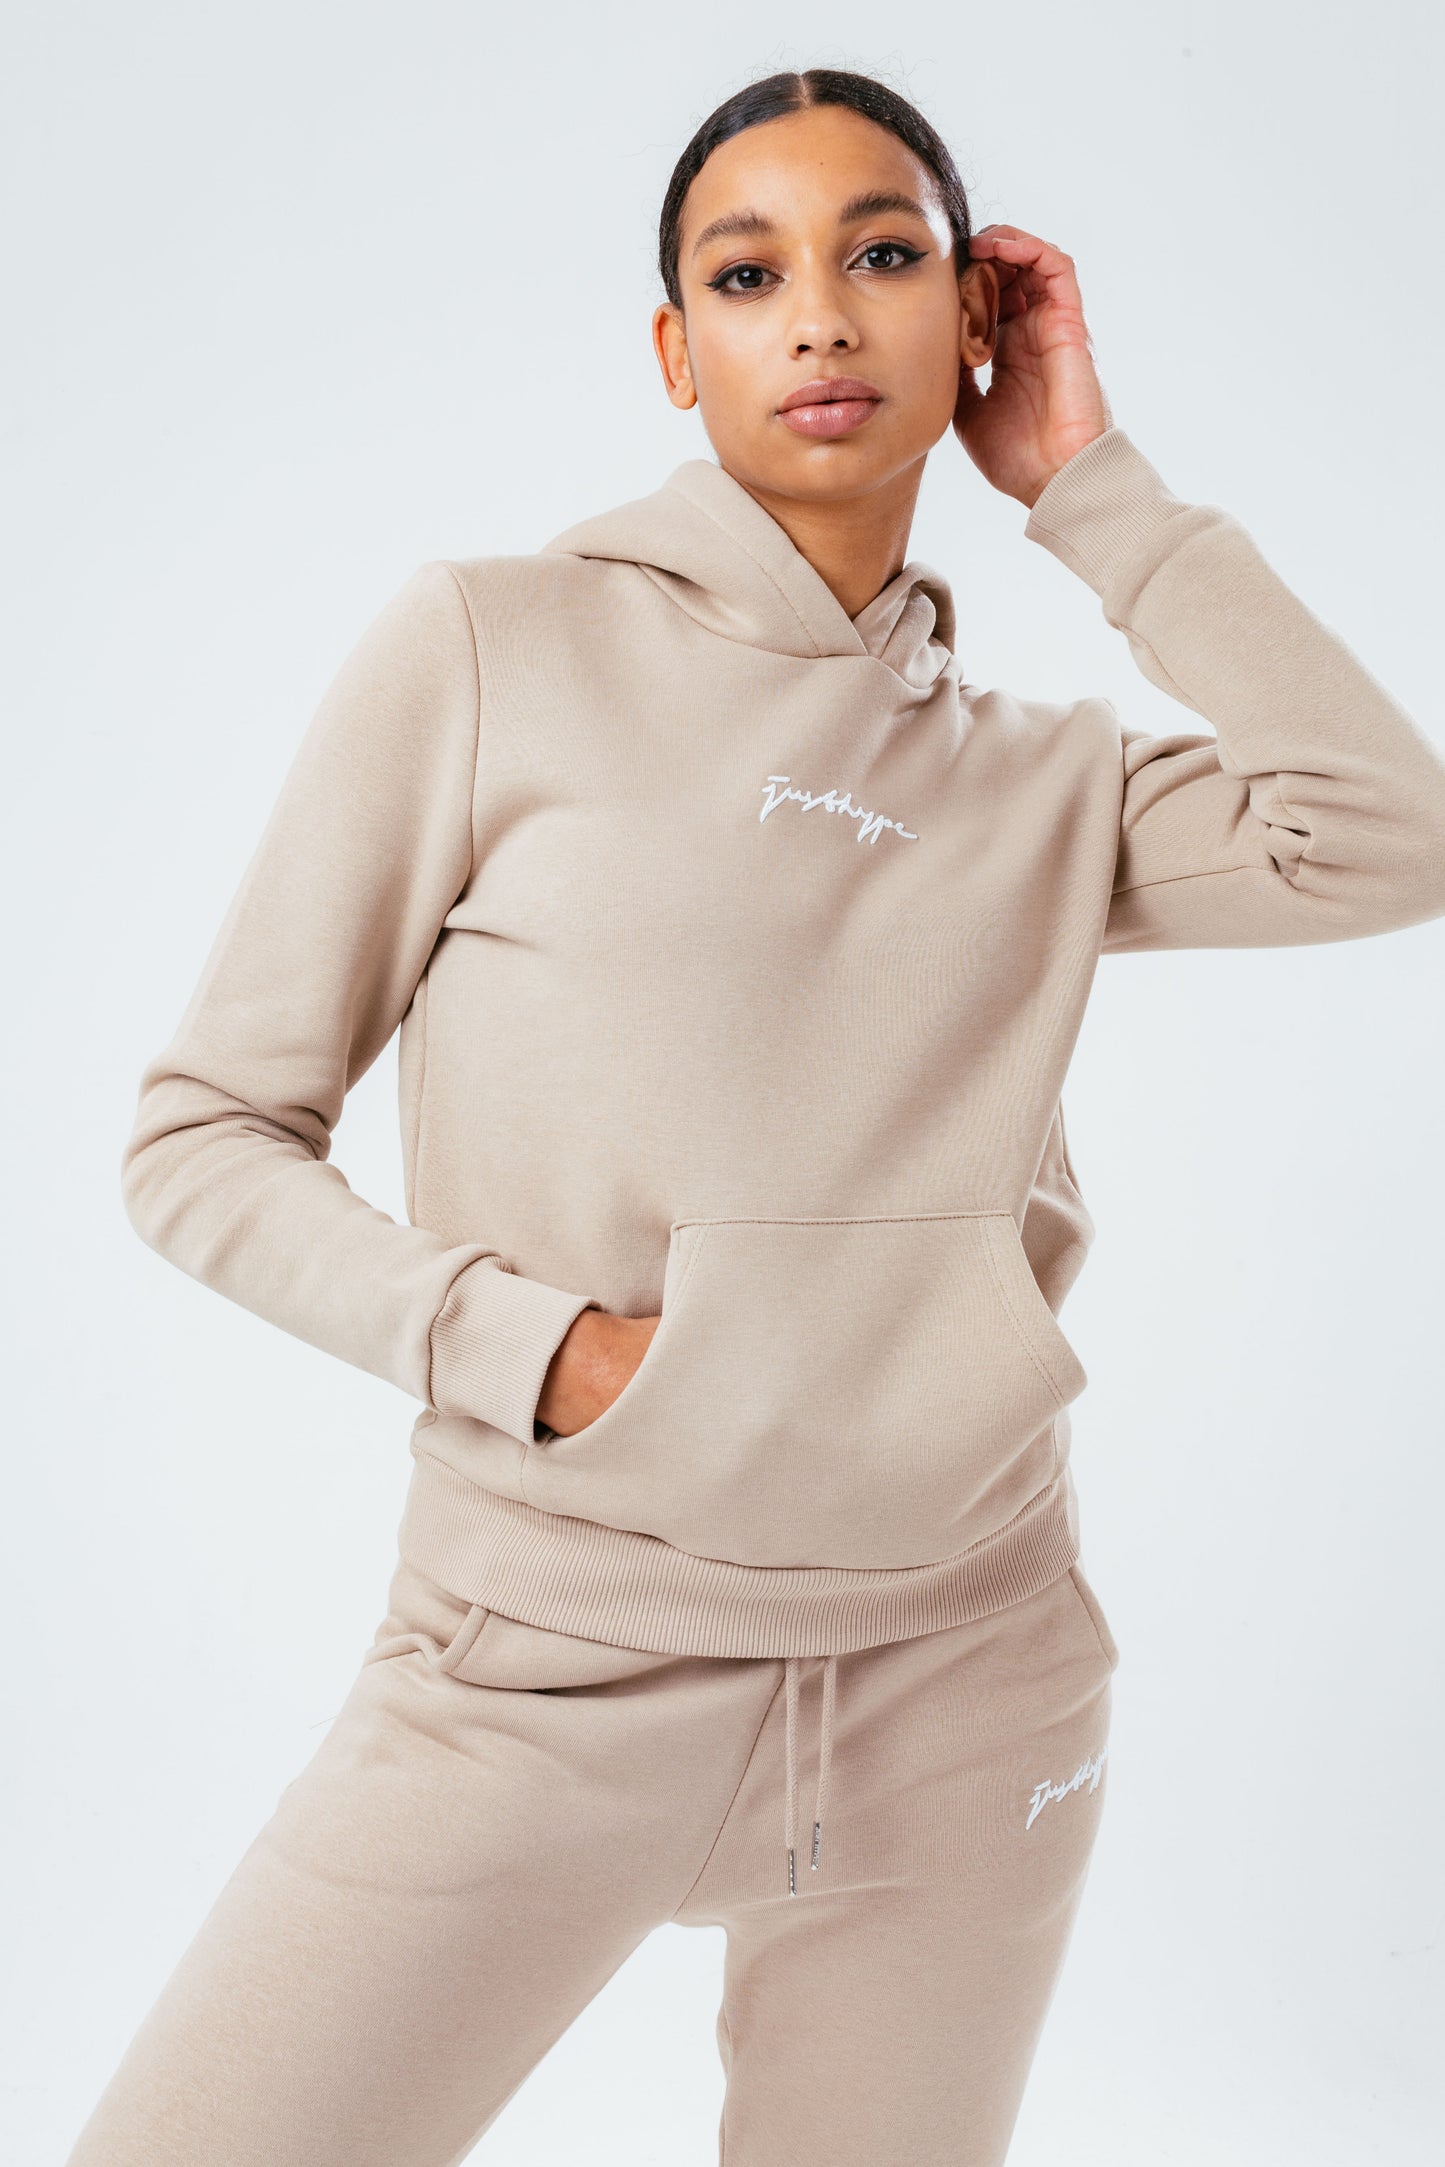 HYPE WHITE OLIVE SCRIBBLE WOMEN'S HOODIE